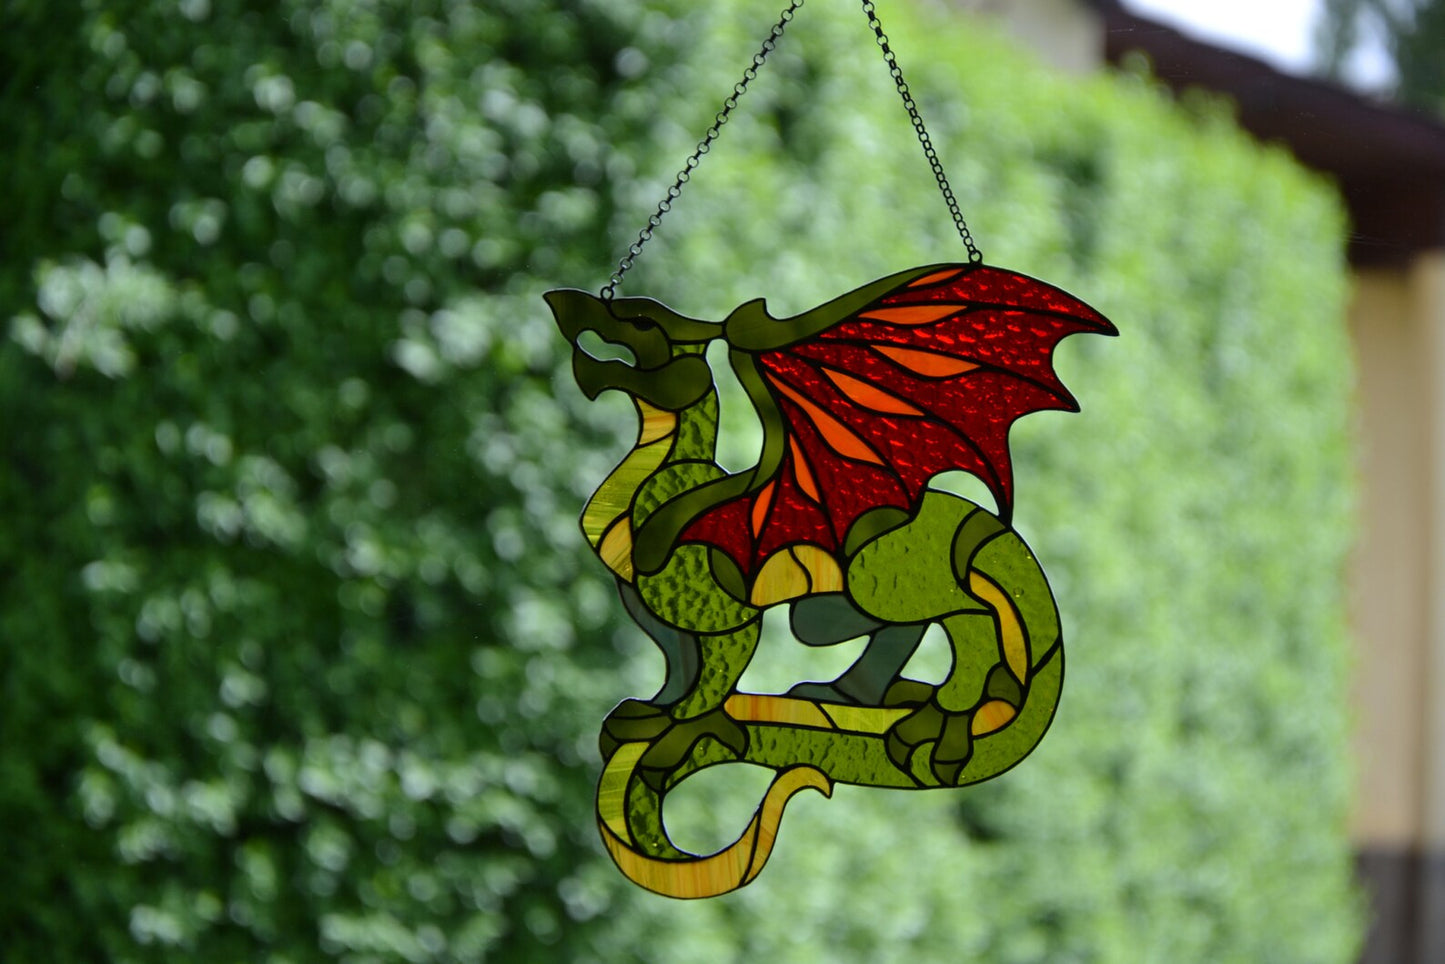 Winged dragon suncatcher Window hanging stained glass sun catcher Wall decor Gift for him Stain glass decor Stained glass sun catcher